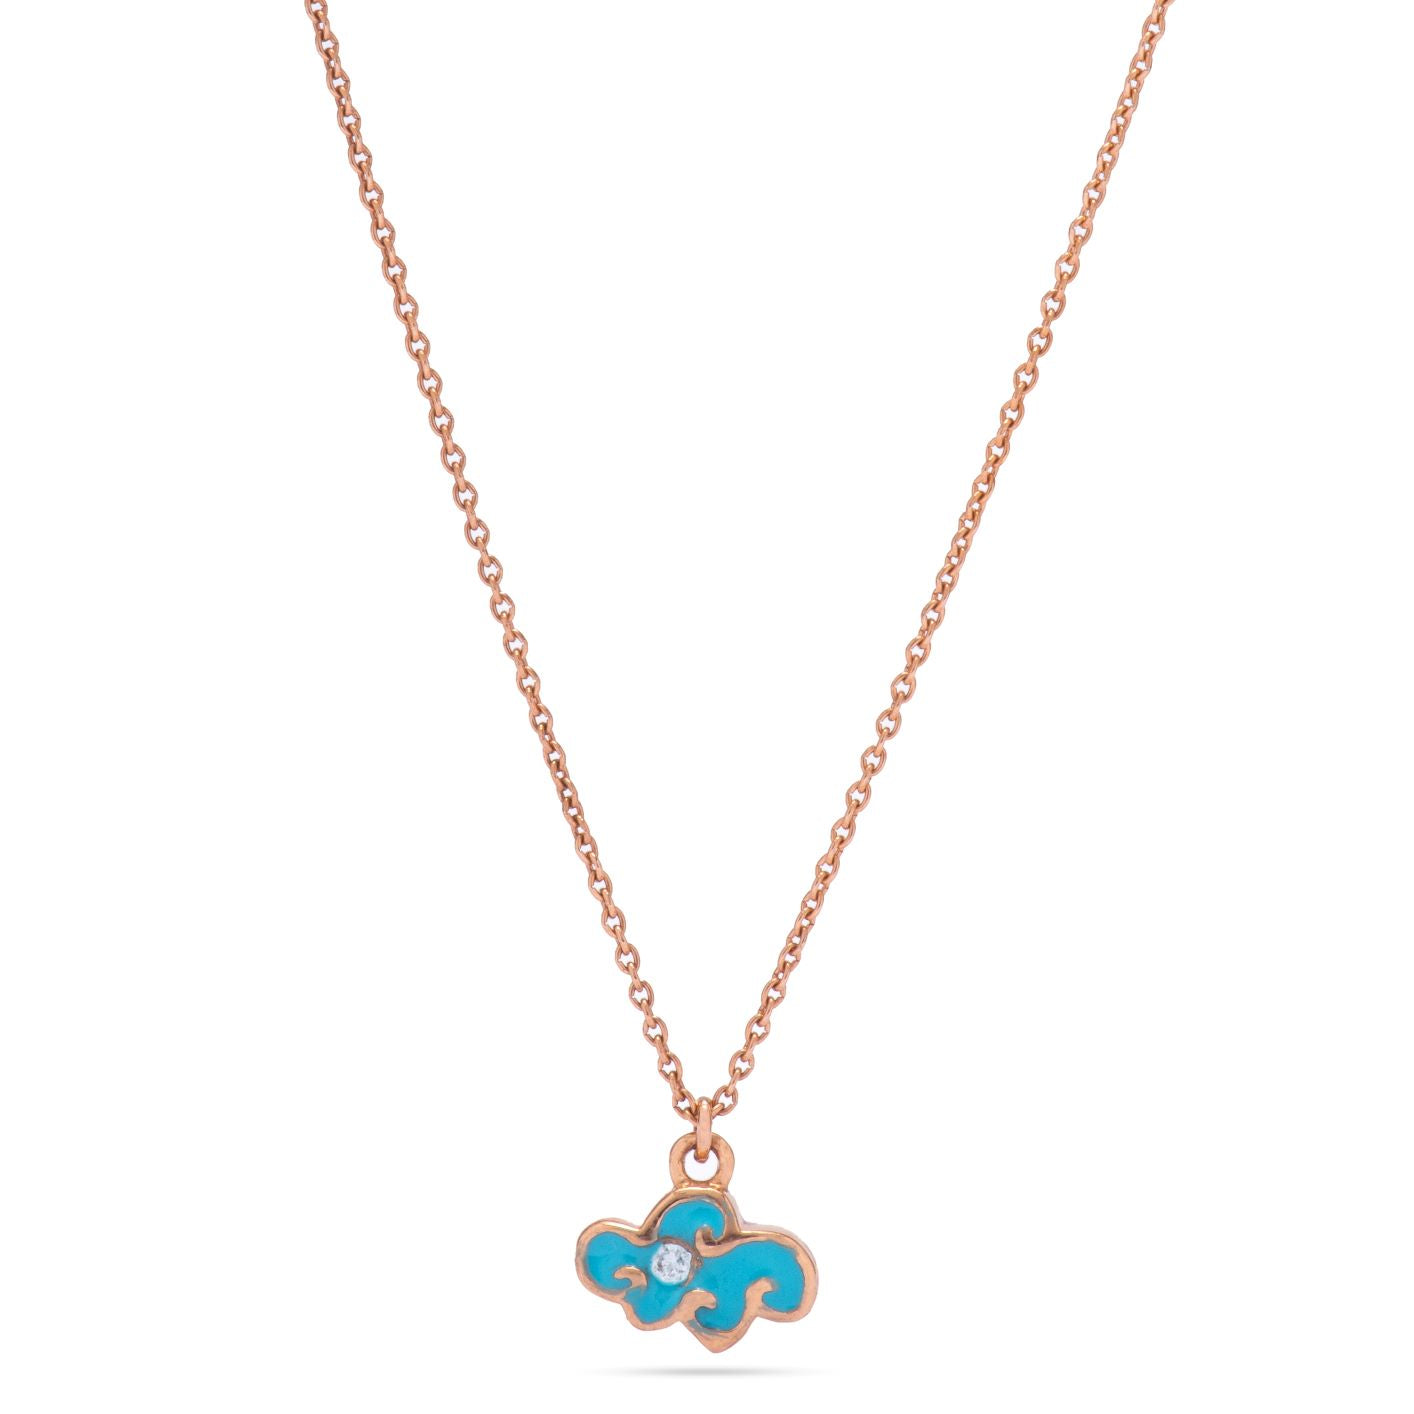 Kid's Cloud Shaped  Necklace in Yellow 18 K Gold - NB0653